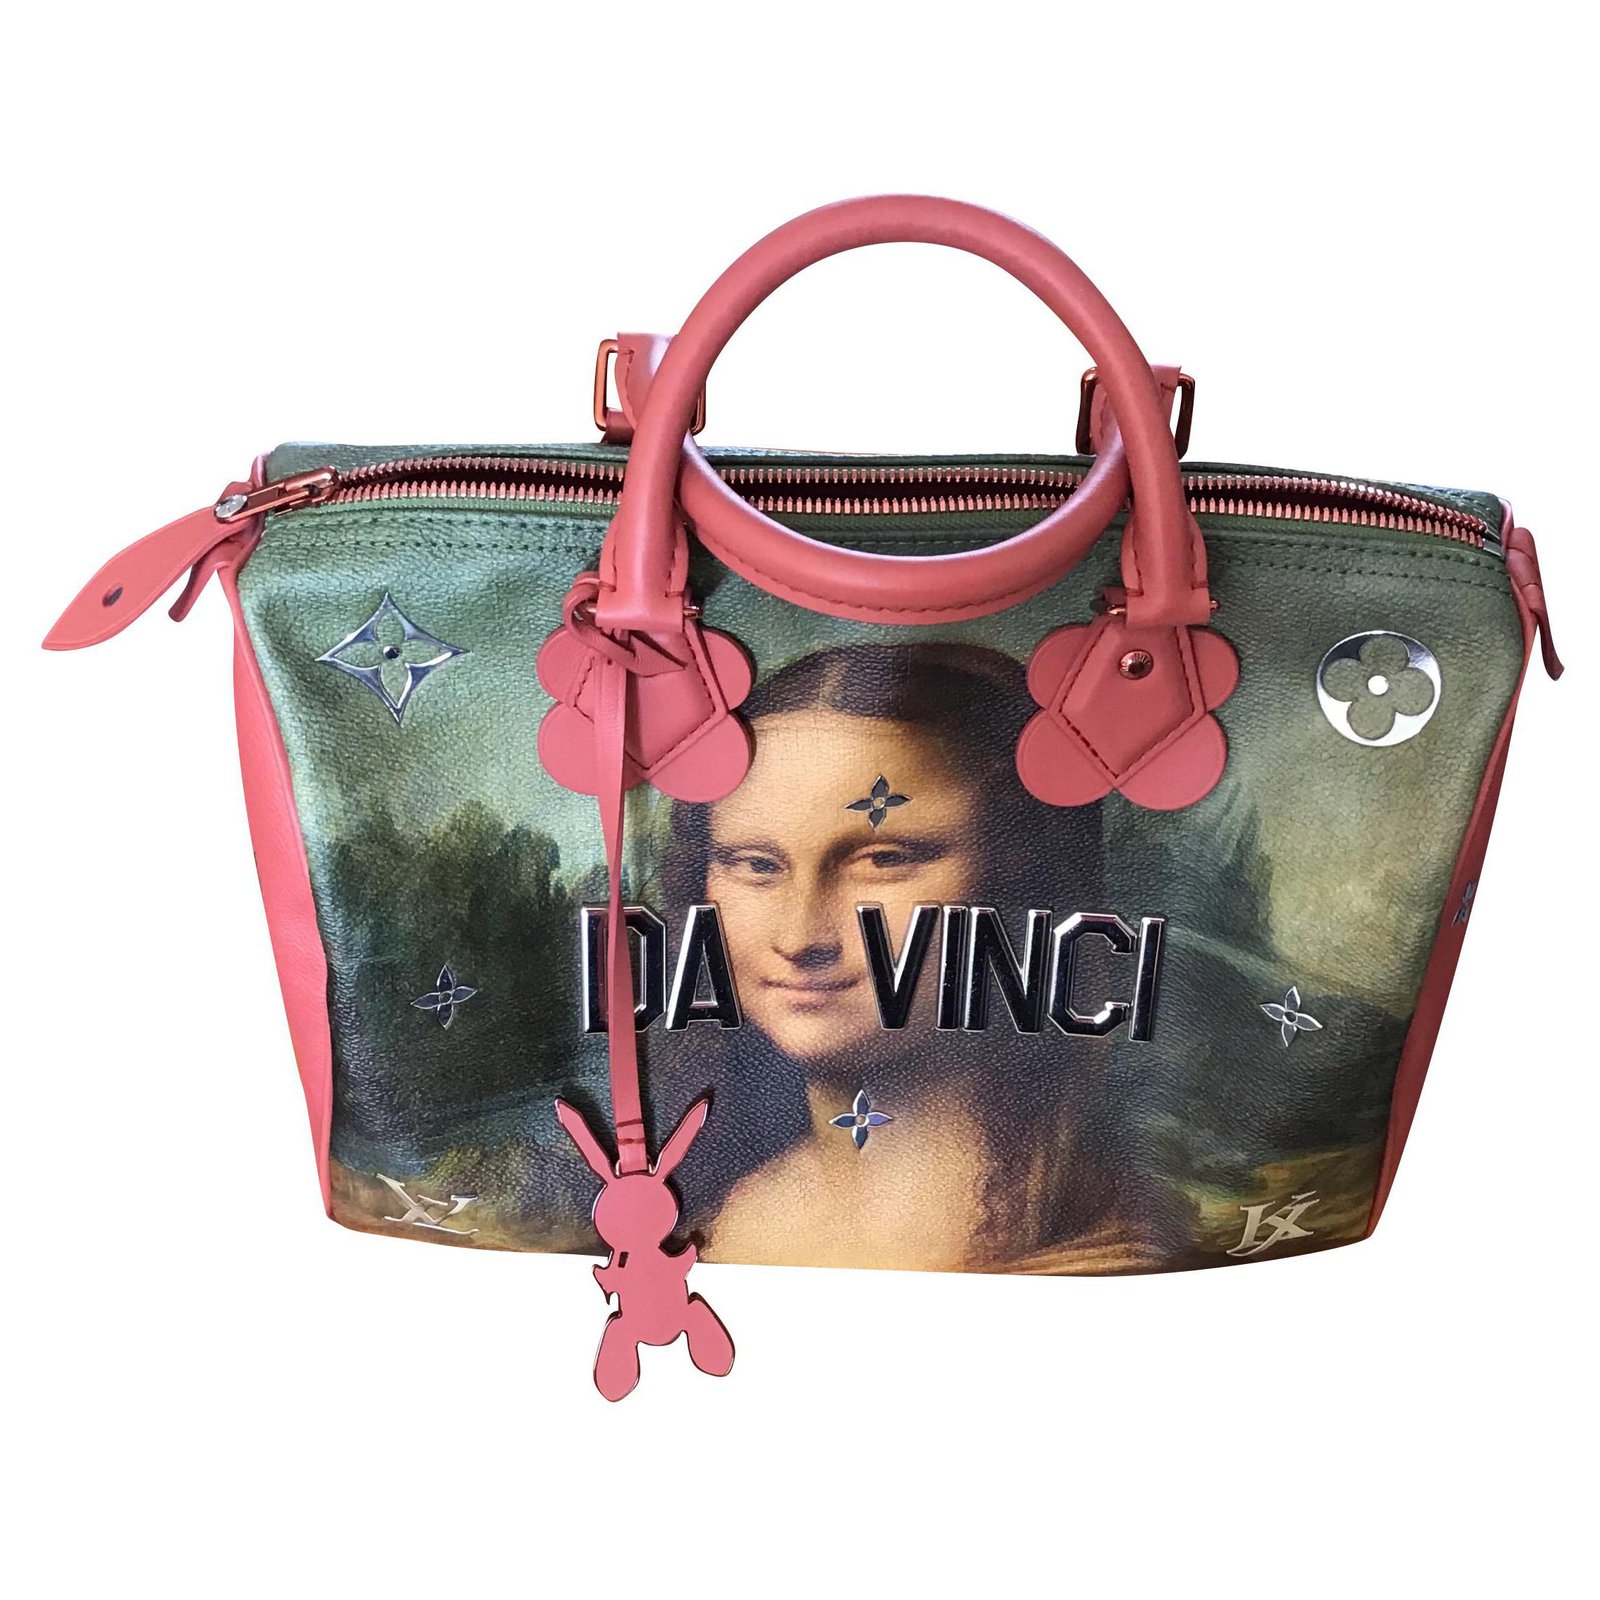 Louis Vuitton Masters: Jeff Koons is the first ever to rework the monogram